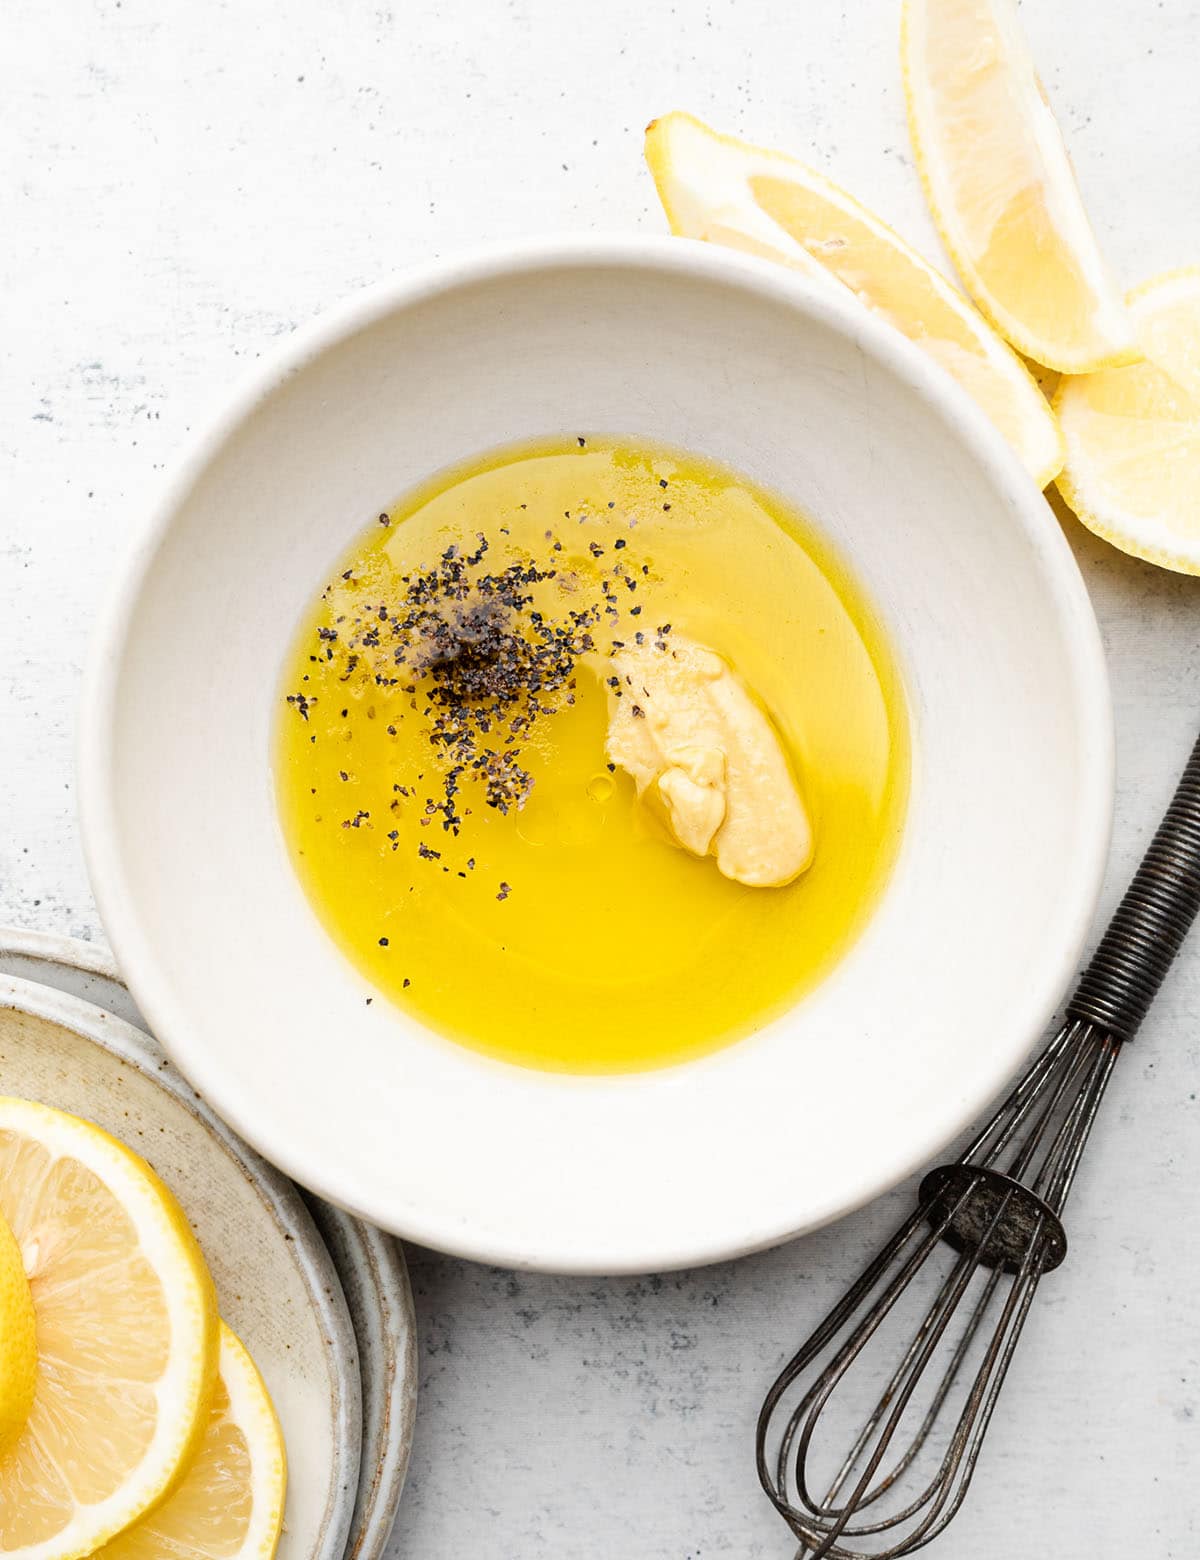 Oil, lemon juice, mustard, and pepper in a small white bowl next to a black whisk.